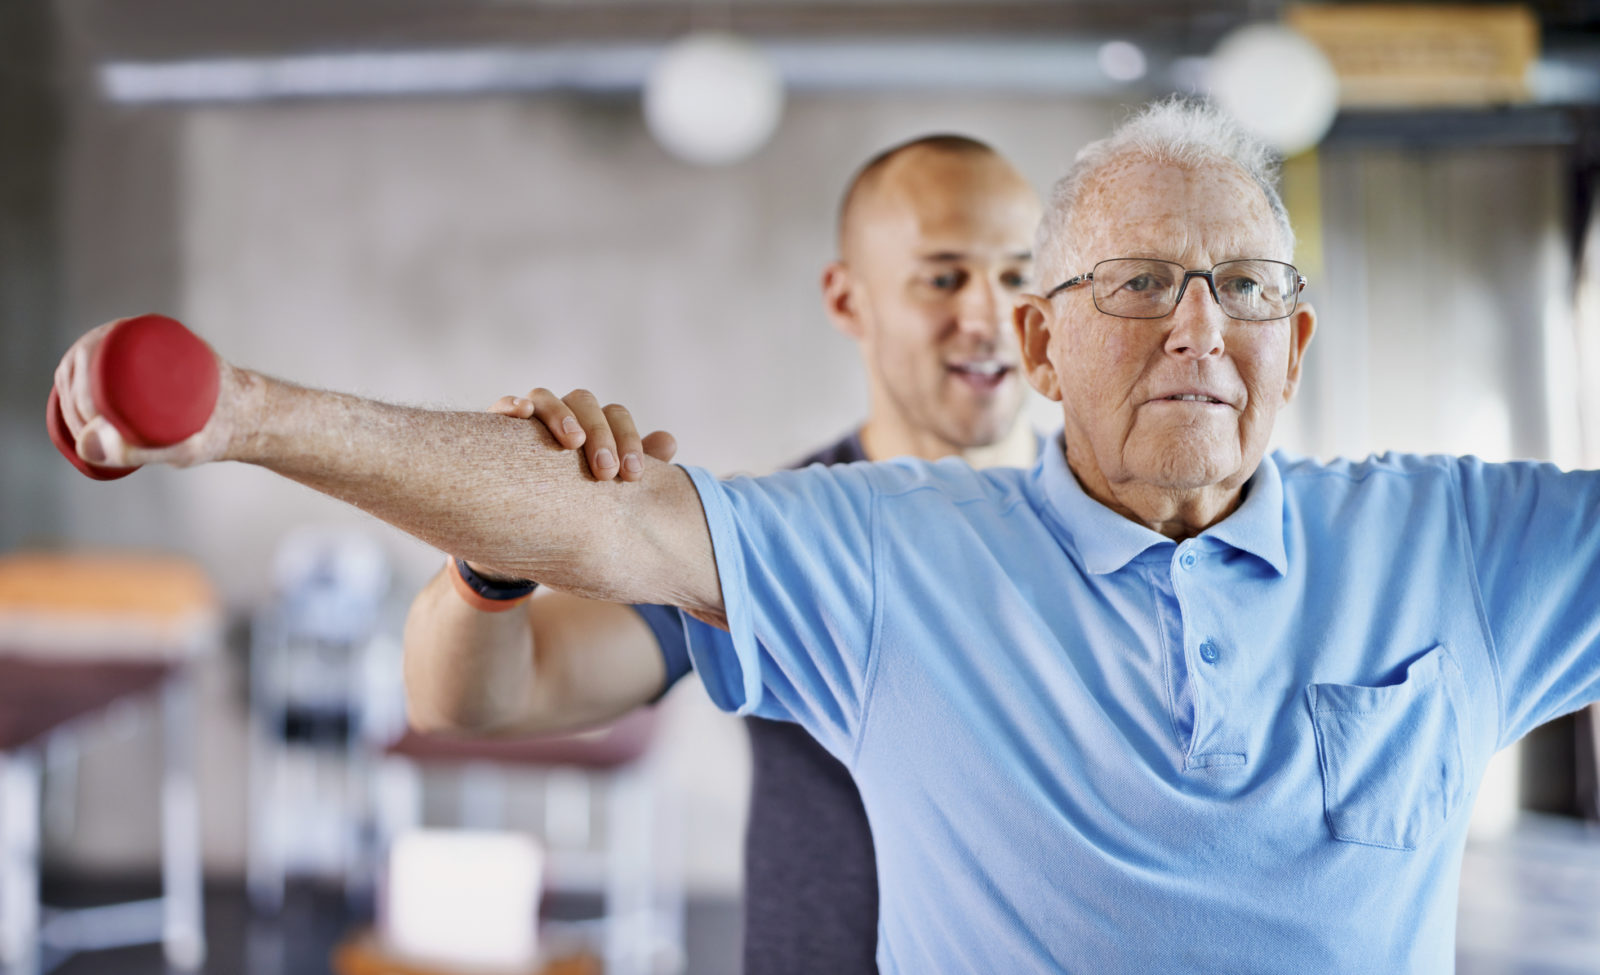 Physical therapist helping a senior man with weights